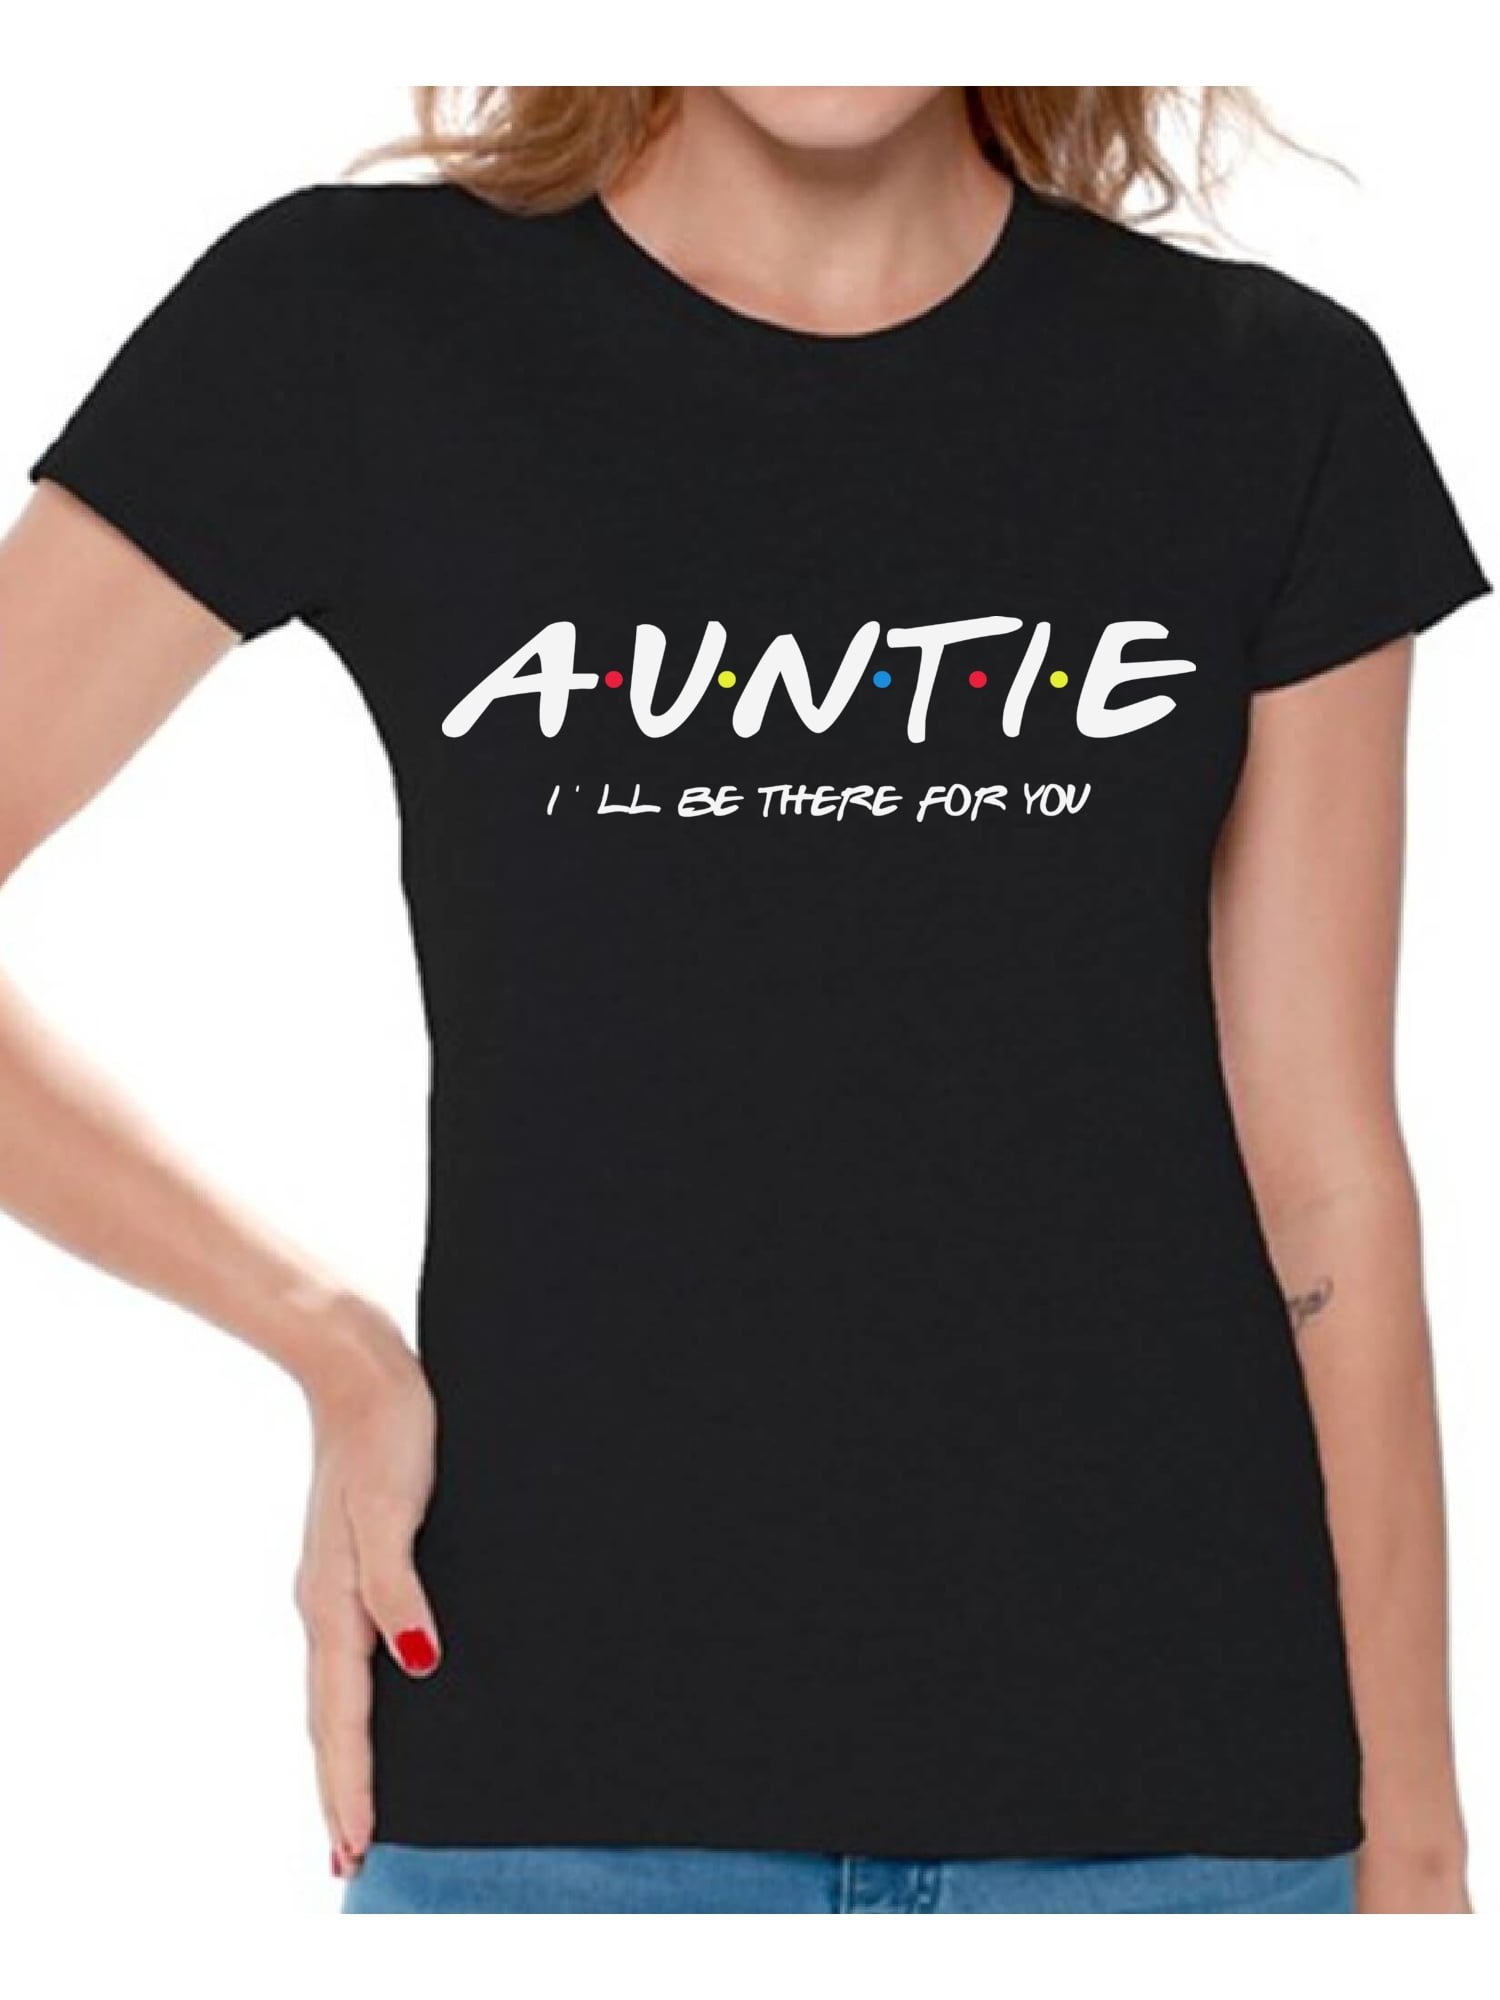 Baby Announcement for Aunts Shirts for Aunts I'm Not a Regular Aunt I'm a Cool Aunt Tee Shirt Auntie Shirt Holiday Gift for Aunts